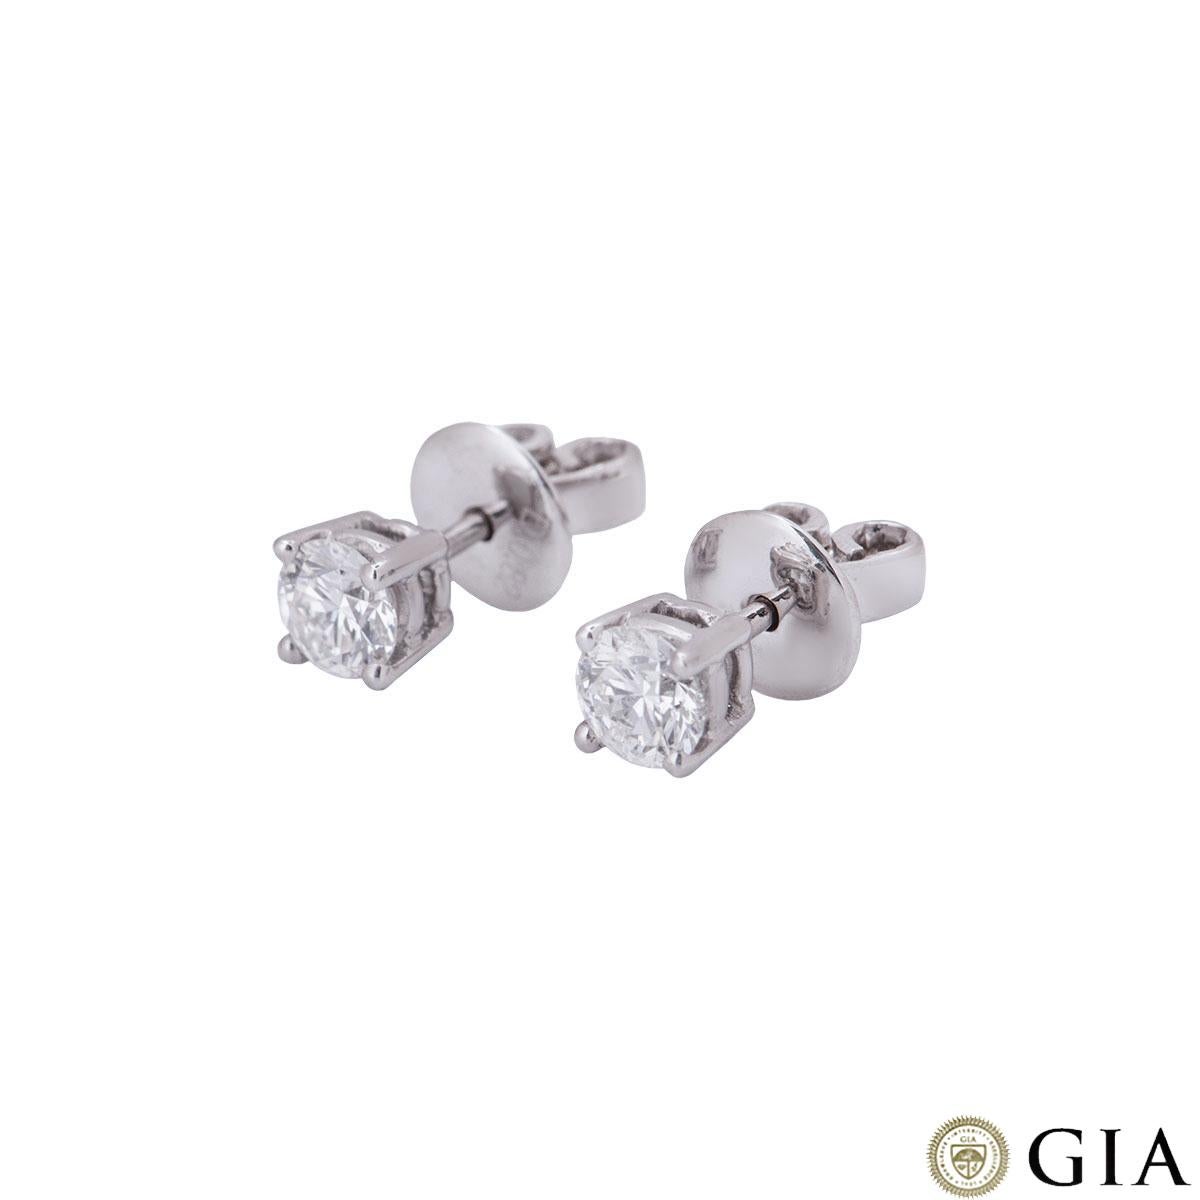 A beautiful pair of 18k white gold diamond stud earrings. The earrings comprise of a single round brilliant cut diamond in a four claw setting, each weighing 0.41ct, both F colour and VS1 in clarity. The earrings feature post and butterfly push back